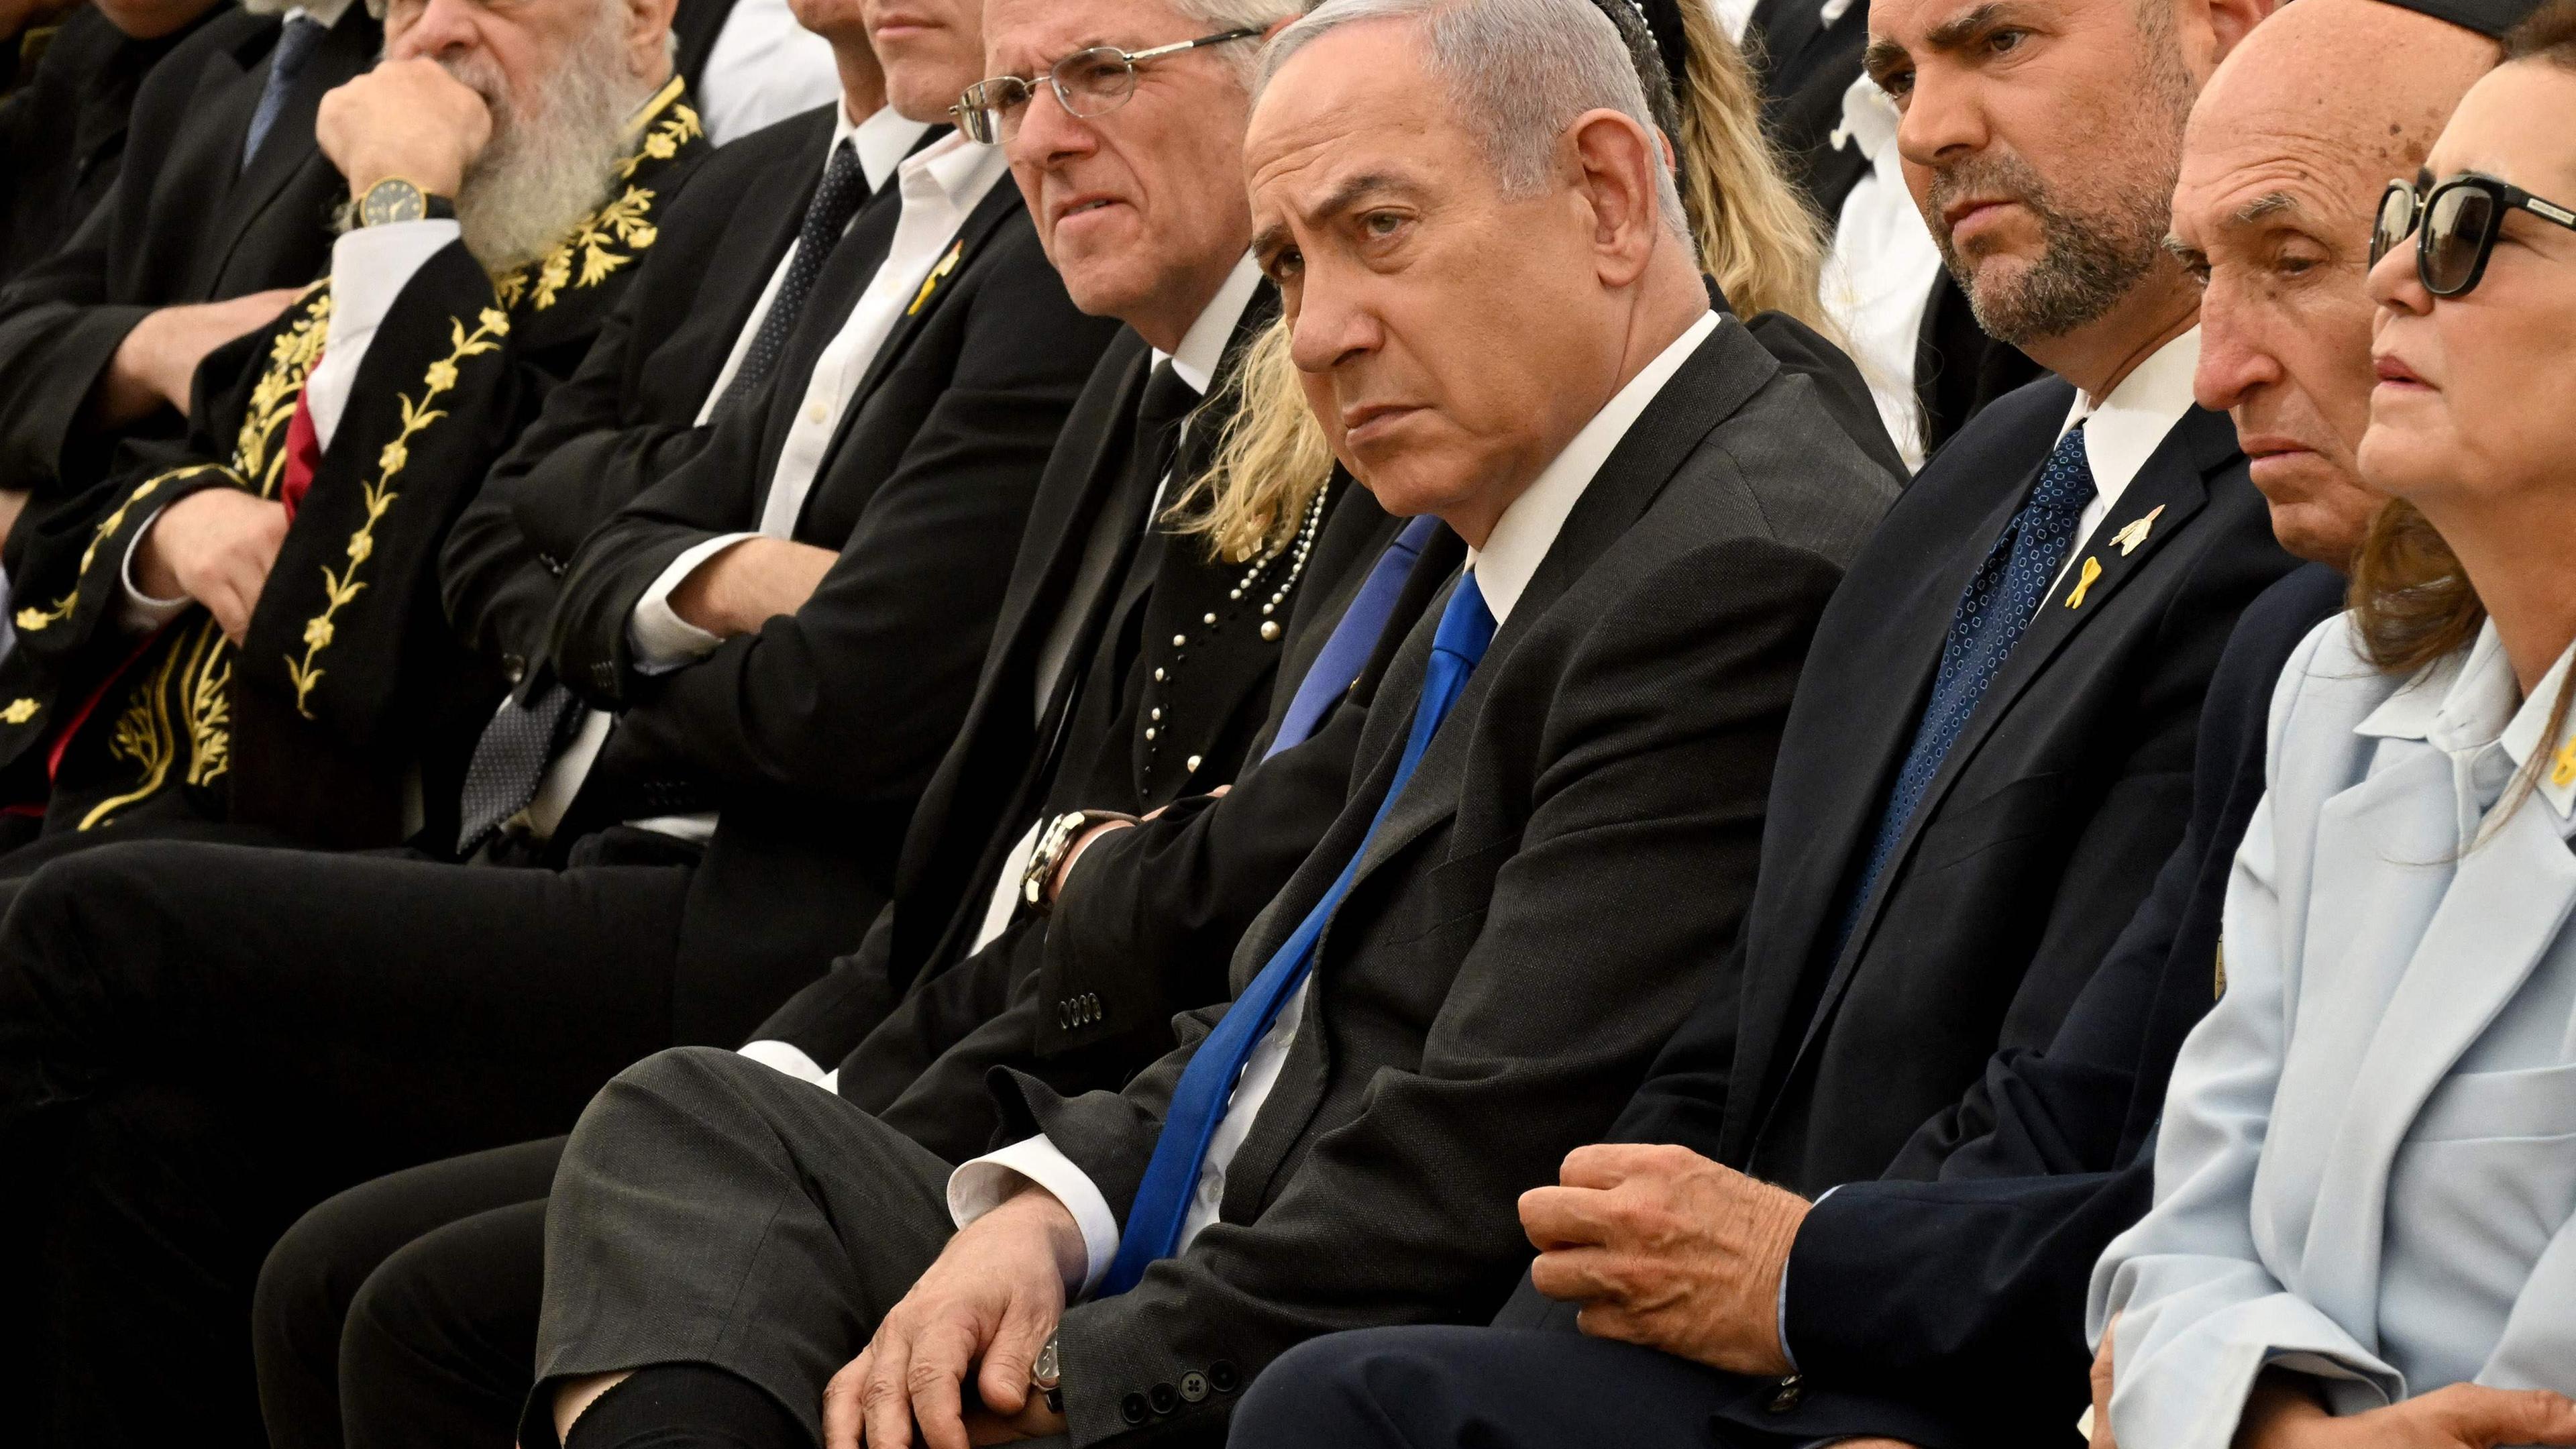 Israeli Prime Minister Benjamin Netanyahu (C) attends a ceremony on the eve of the Memorial Day for fallen soldiers